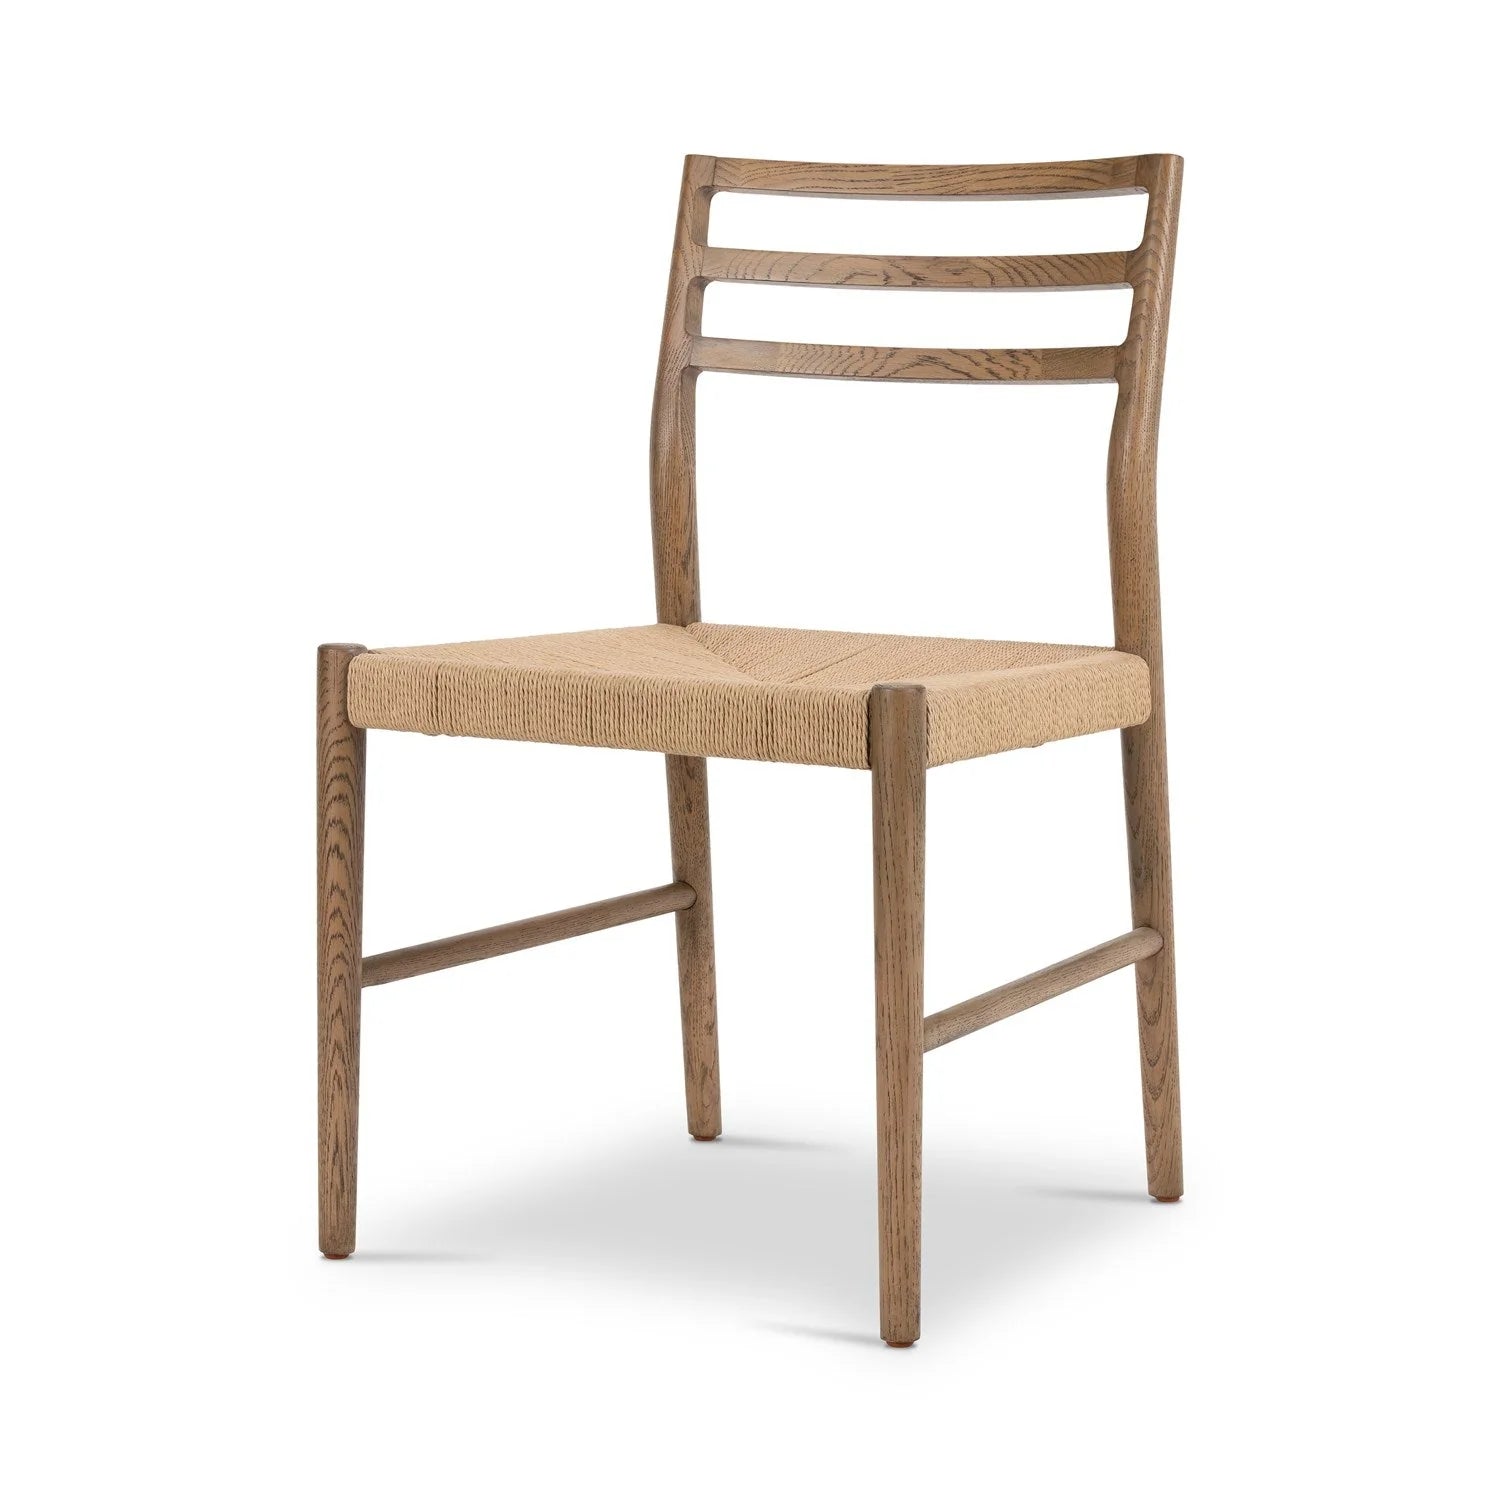 GLENMORE WOVEN DINING CHAIR